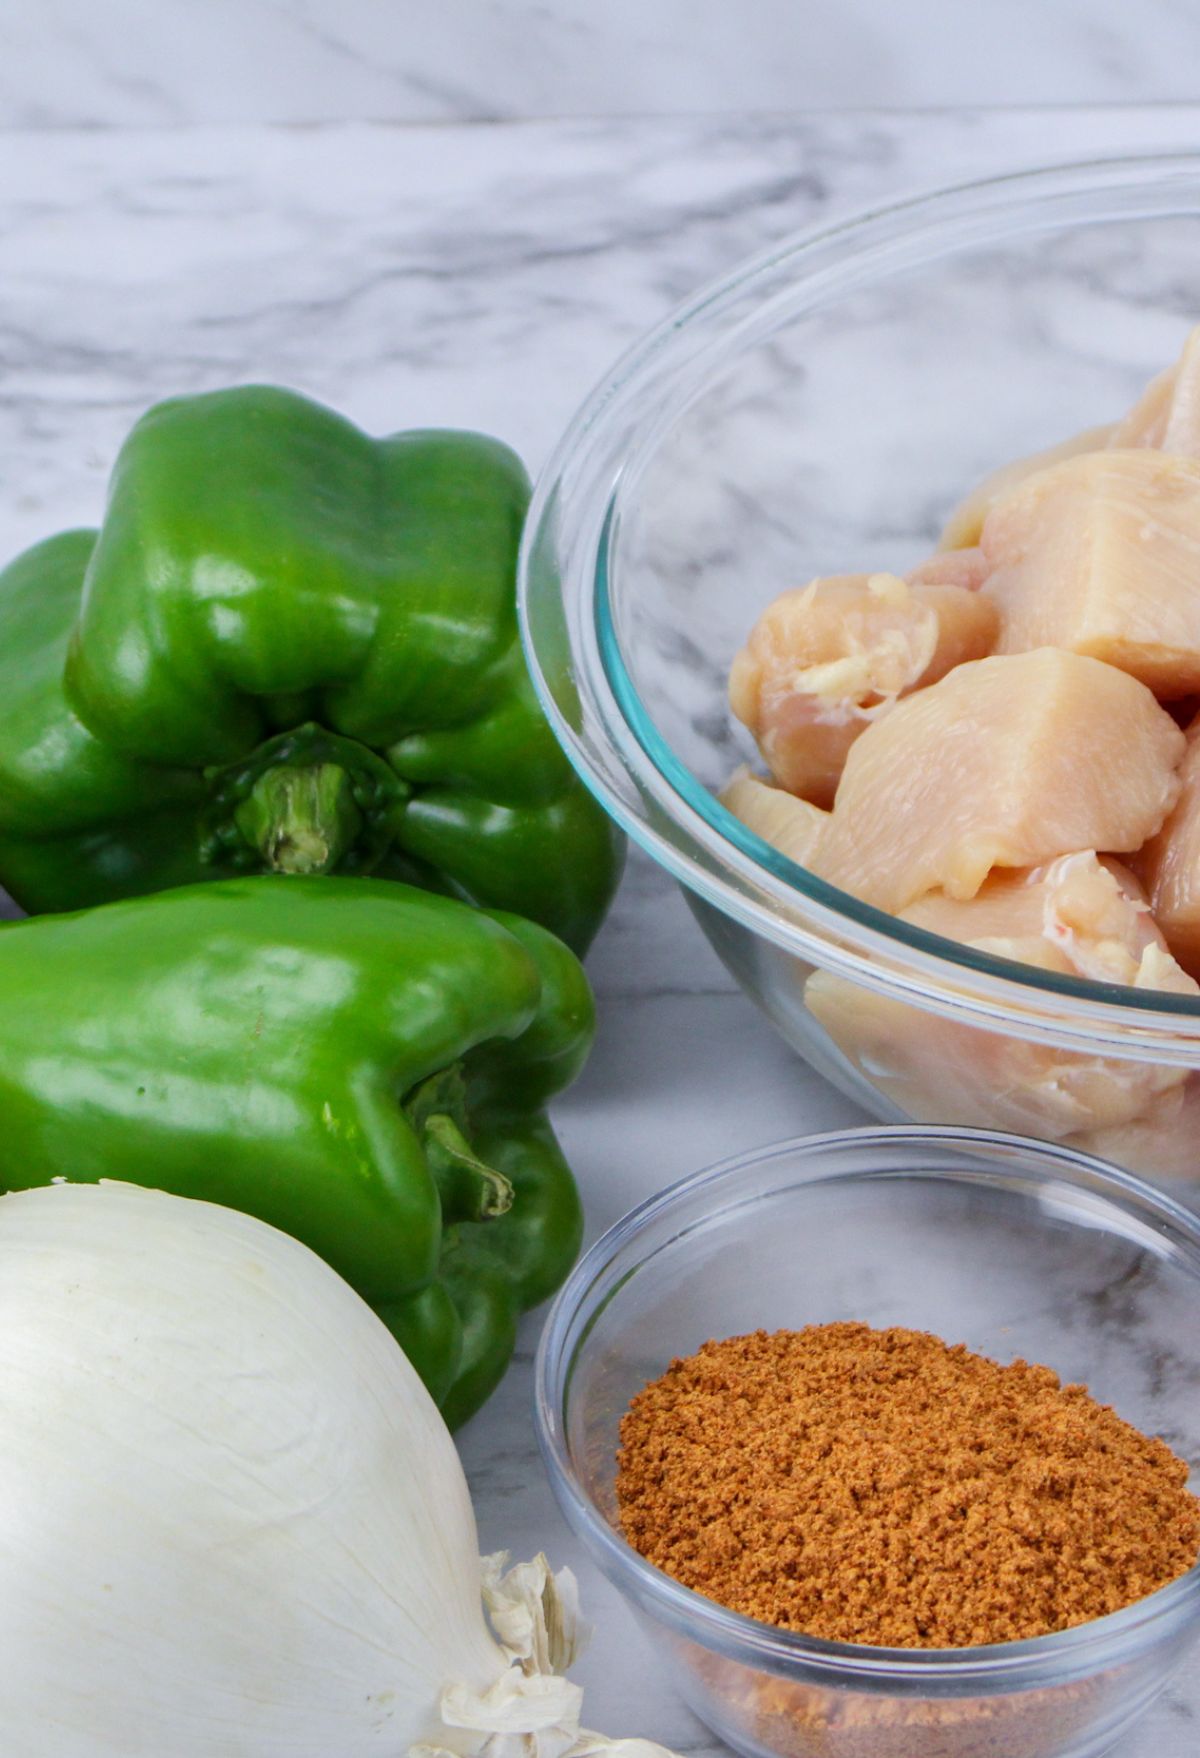 Ingredients for chicken fajitas including peppers, onions and spices.